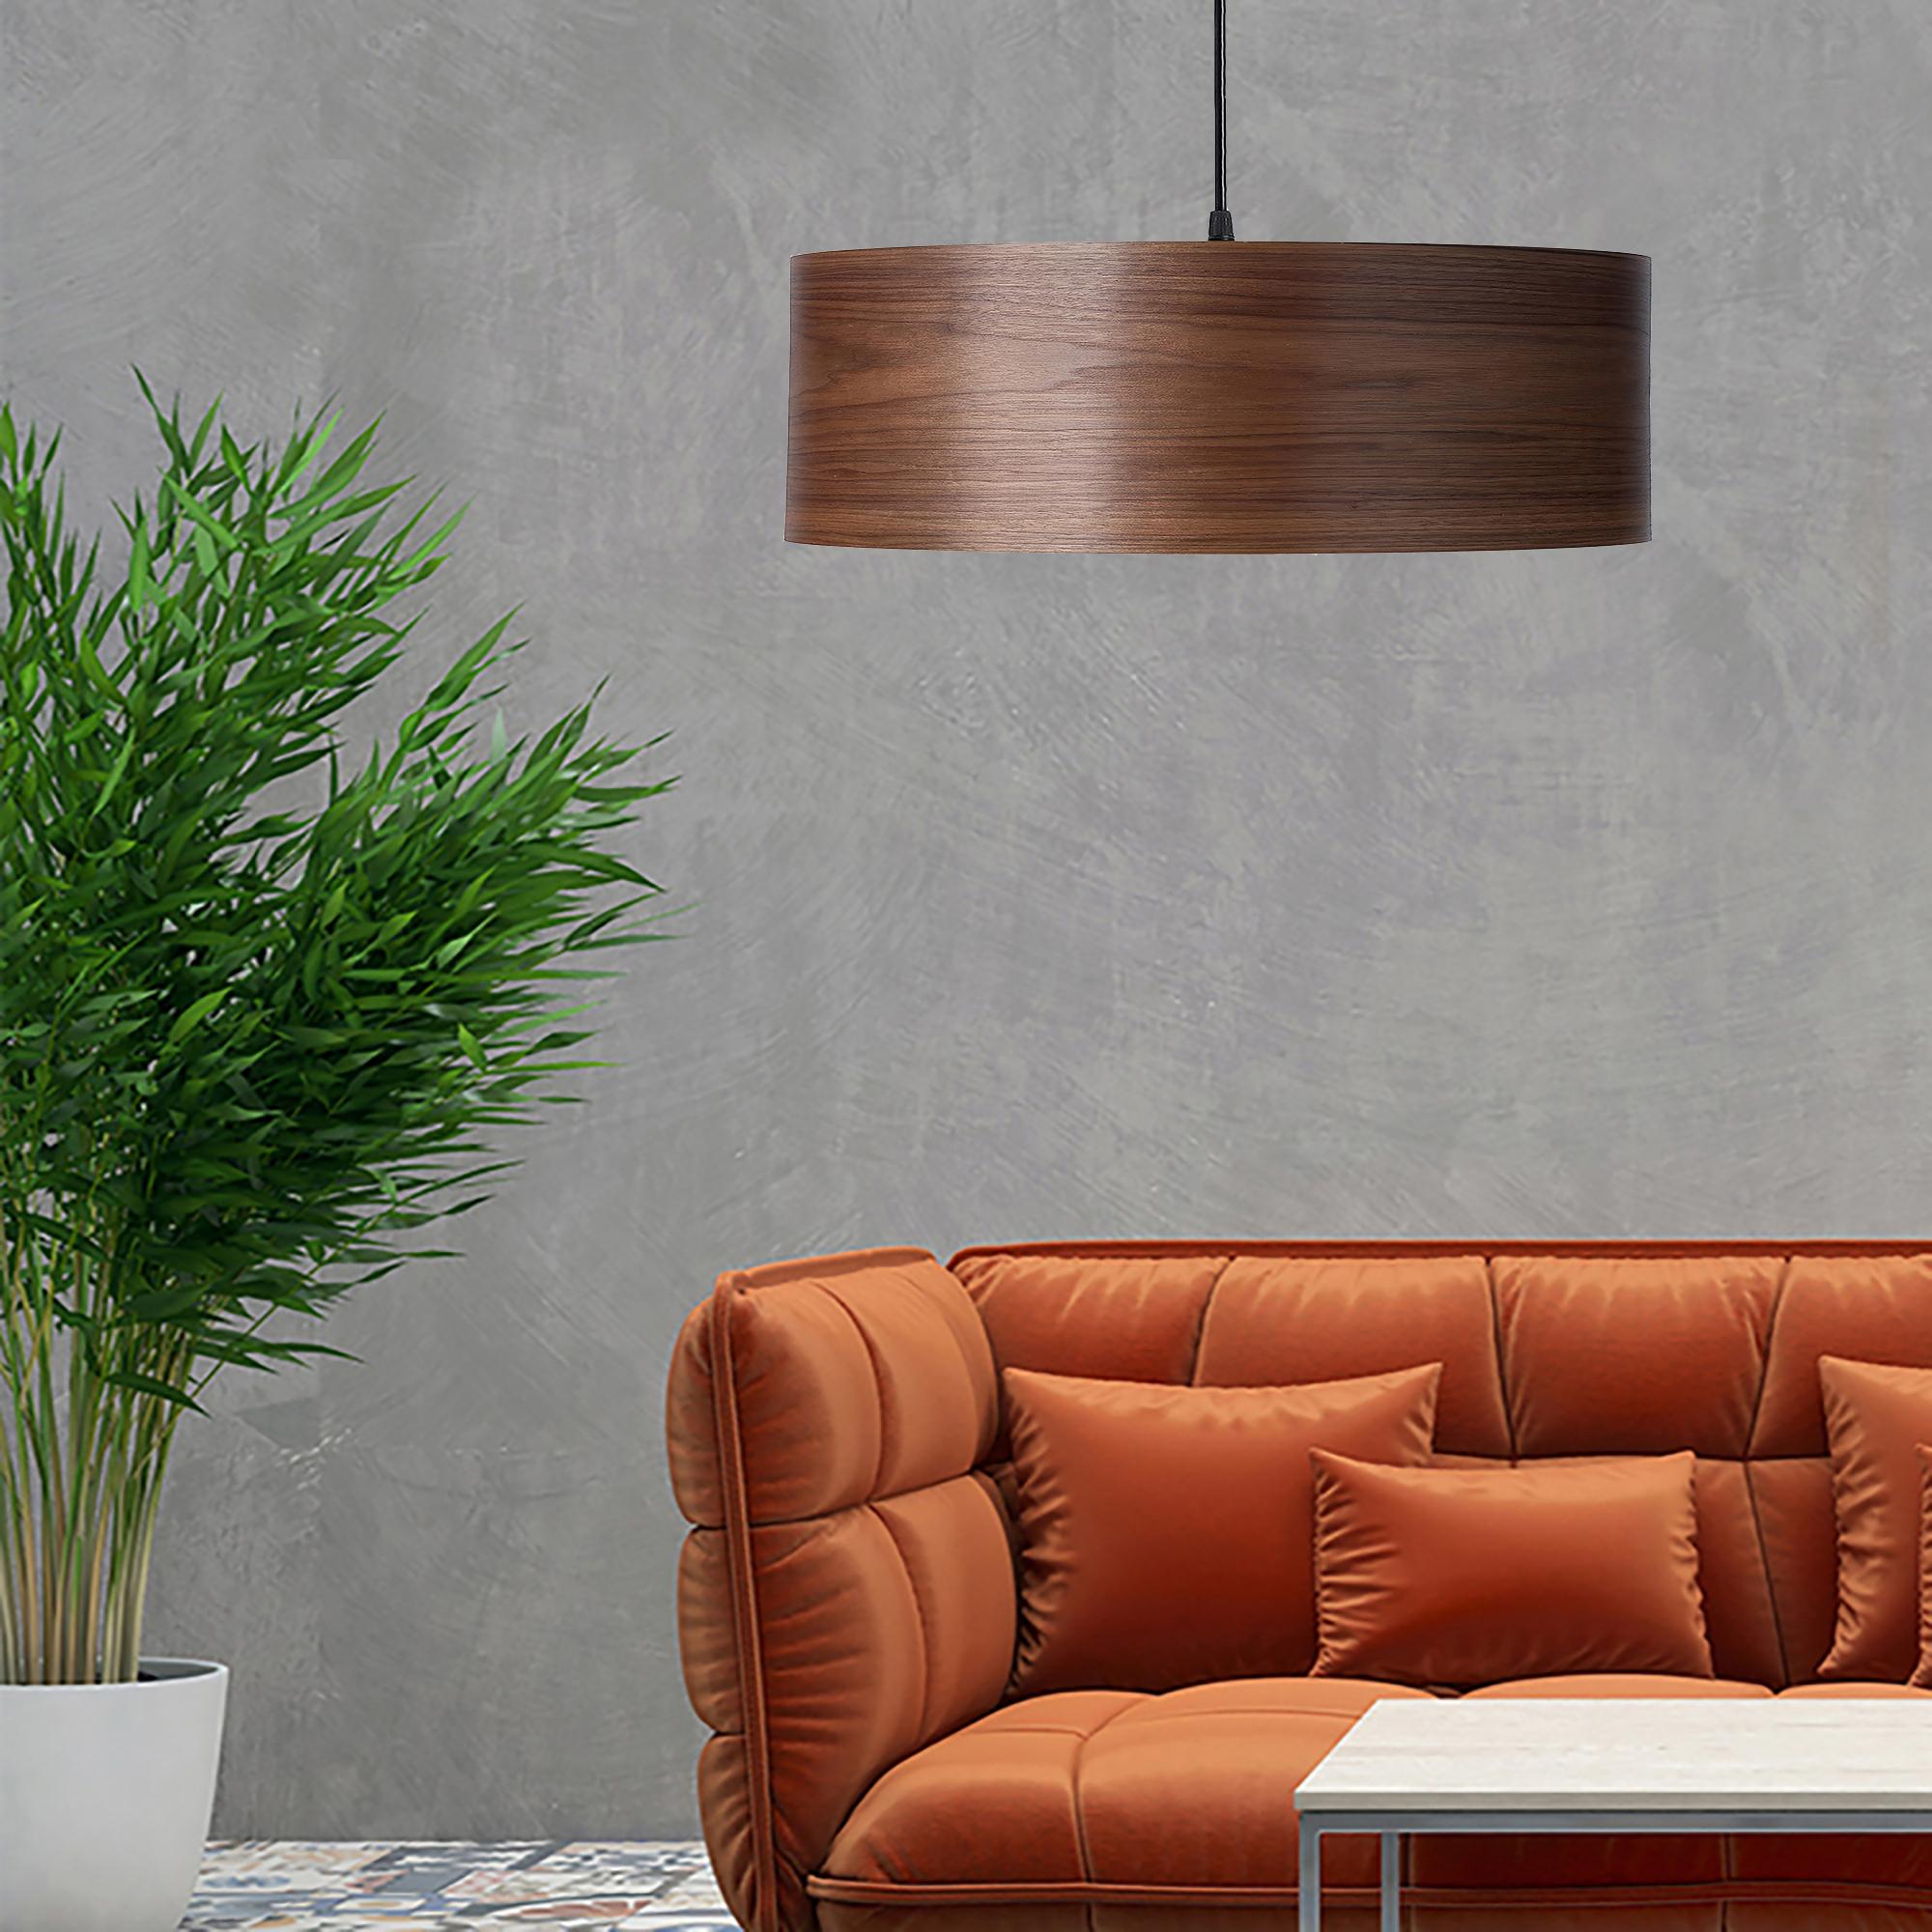 This large walnut wood drum light, ARA Grande, is a Mid-Century Modern style pendant. As a chandelier for alcove, entryway, dining room or conference room, ARA Grande is offered in several customized wood types. ARA Grande gives a warm light,